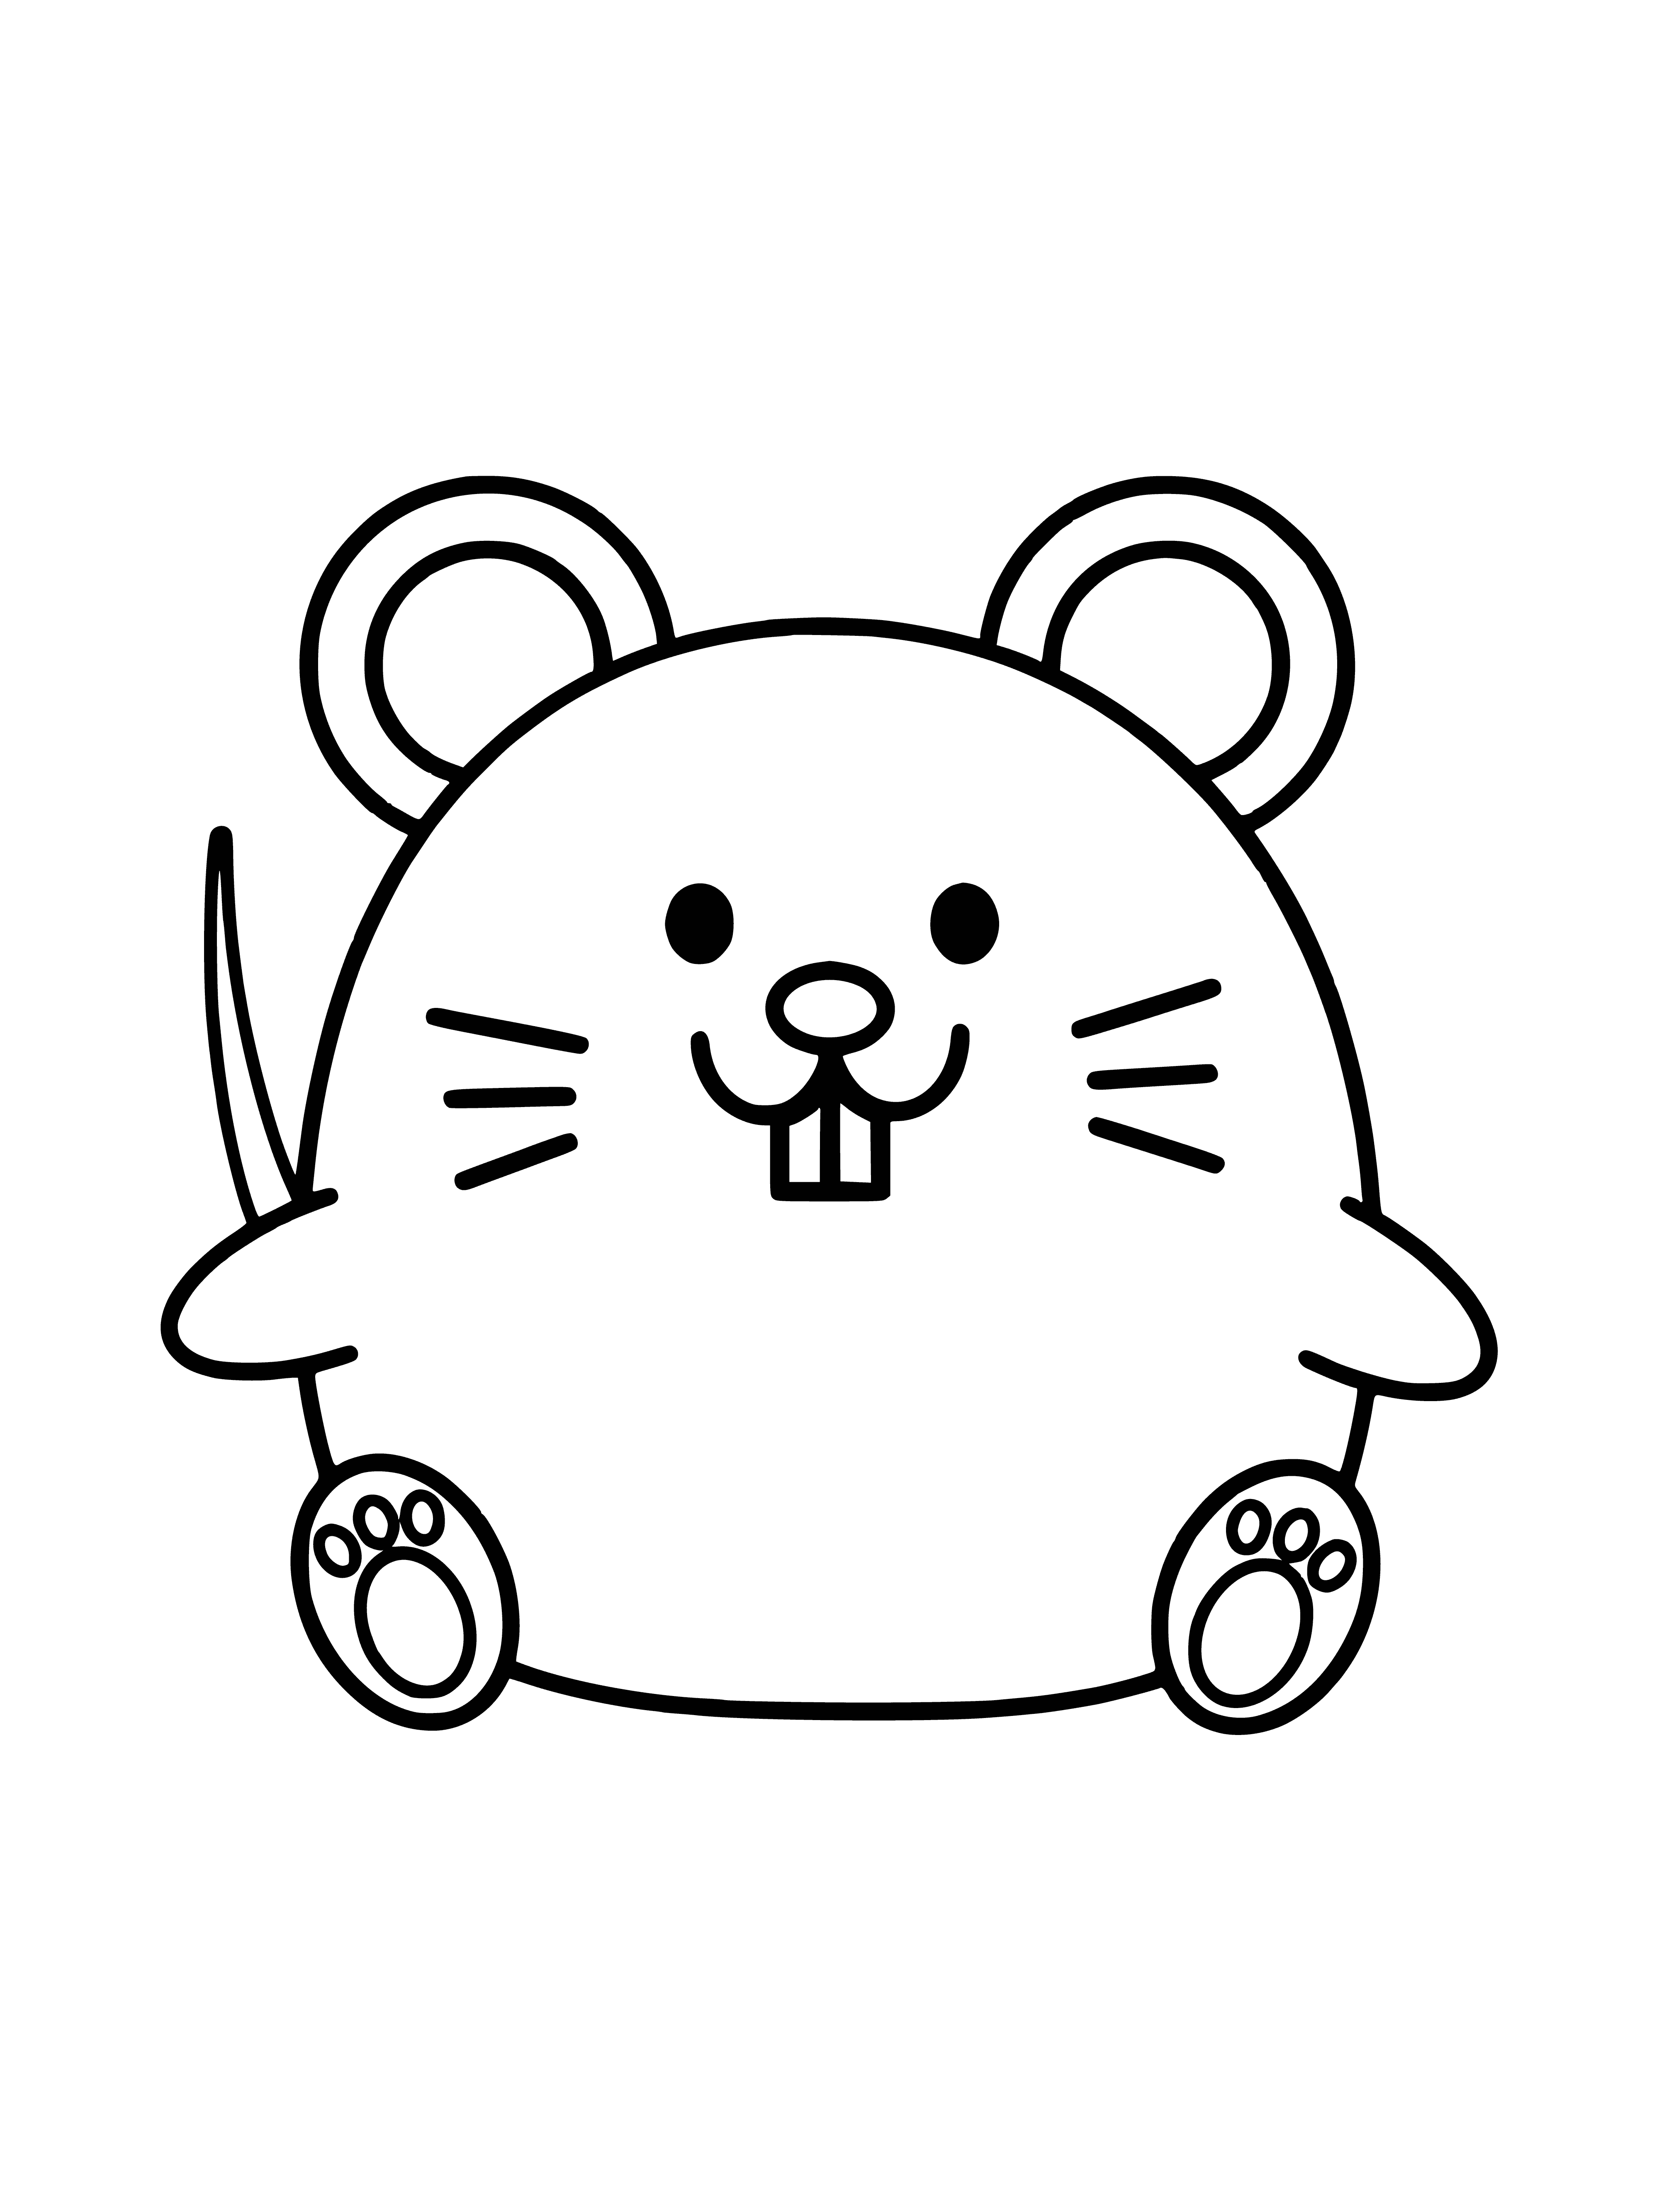 coloring page: Rat cuddles mouse, holding its ears, mouse's eyes closed and mouth in a small grin.